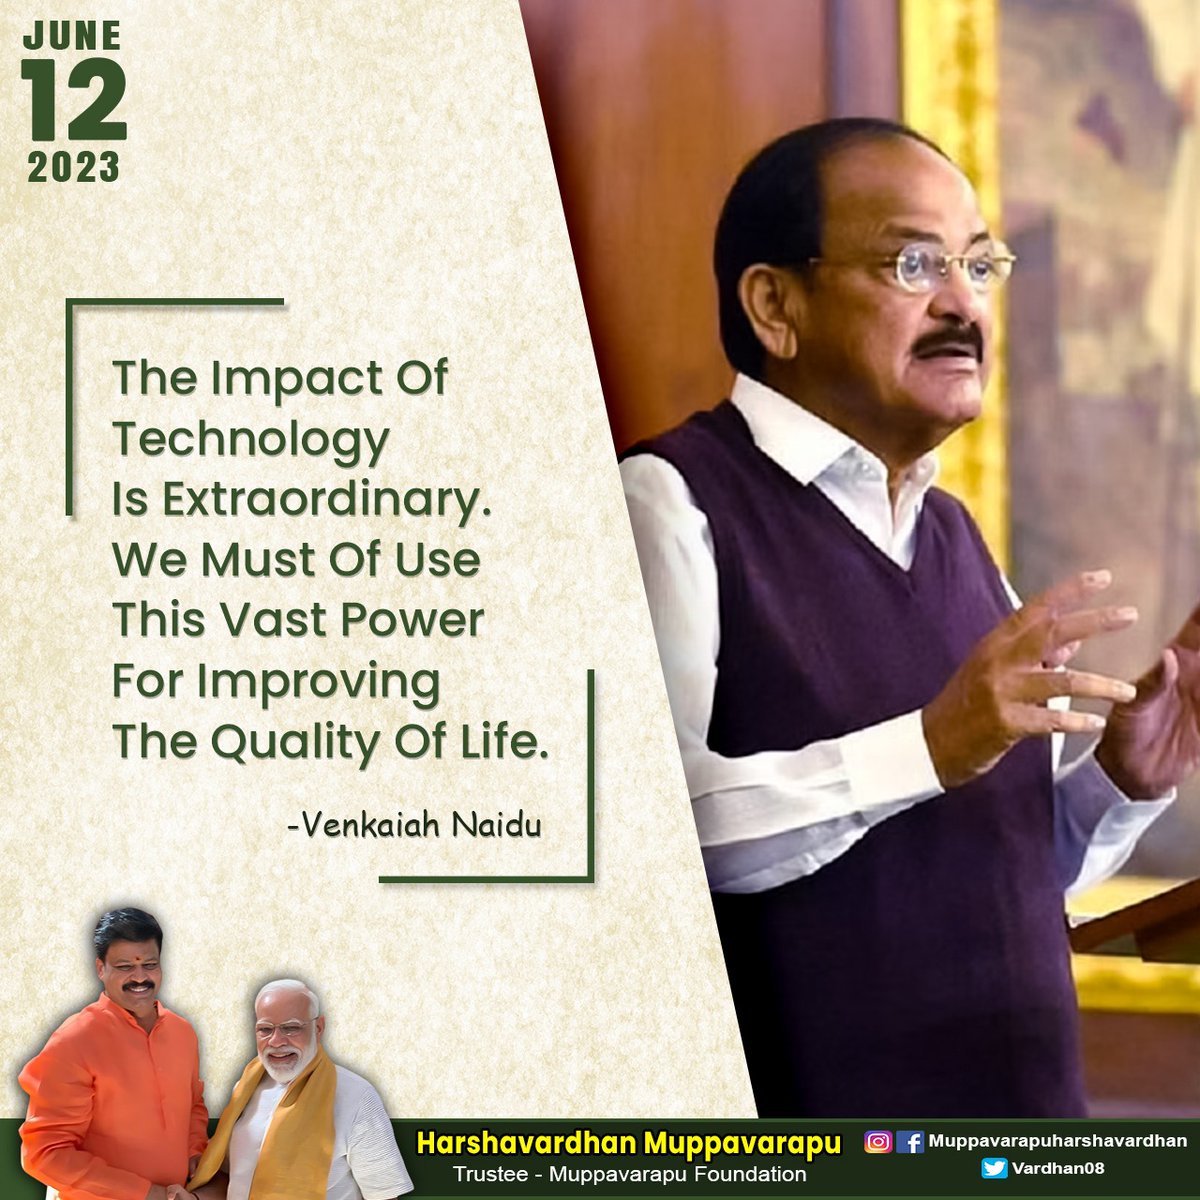 The impact of technology is extraordinary. We must of use this vast power for improving the quality of life.

- #VenkaiahNaidu

#GoodMorningEveryone 🌞